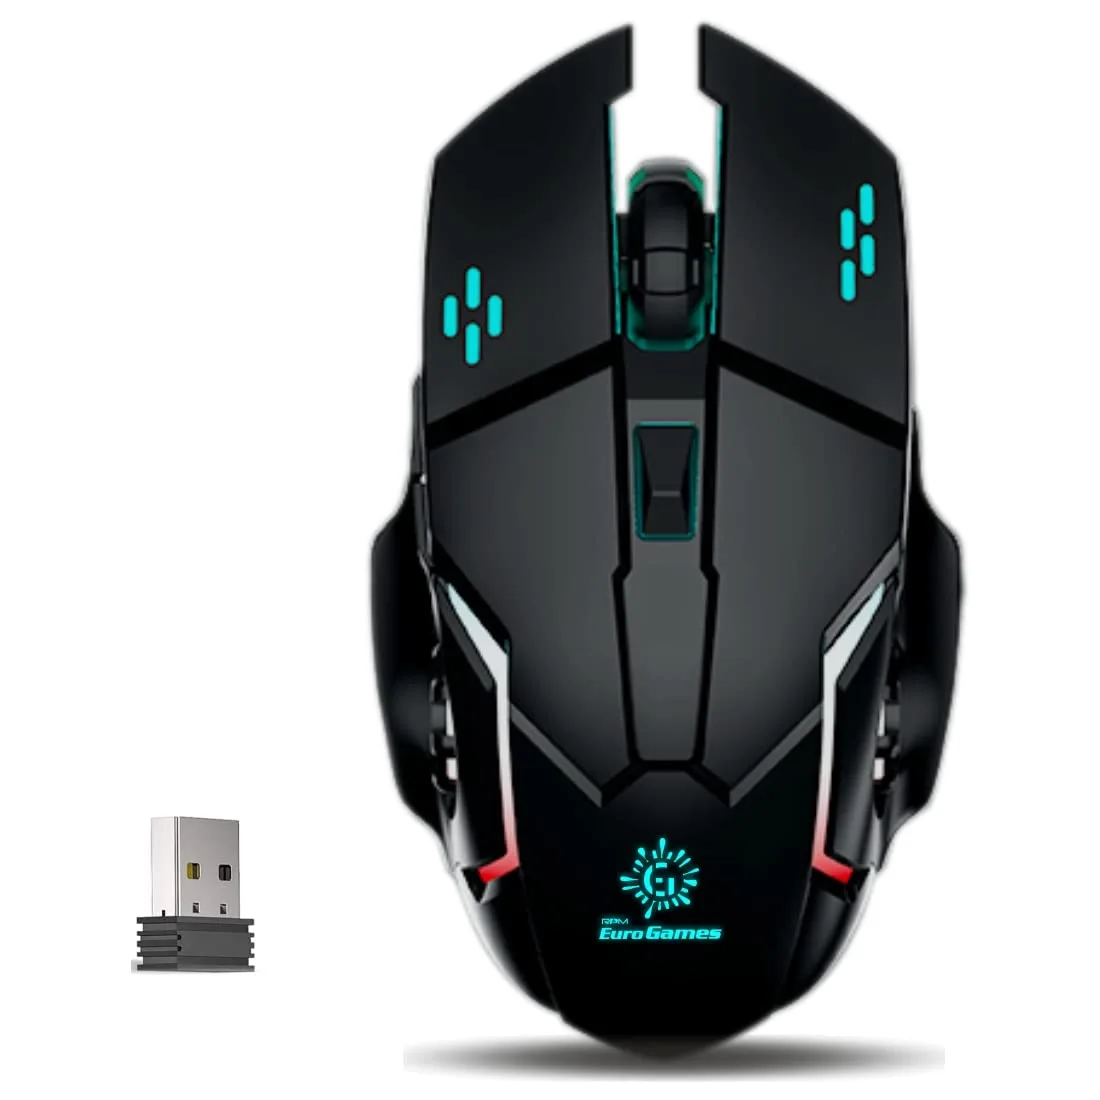 RPM Euro Games Wireless Gaming Mouse